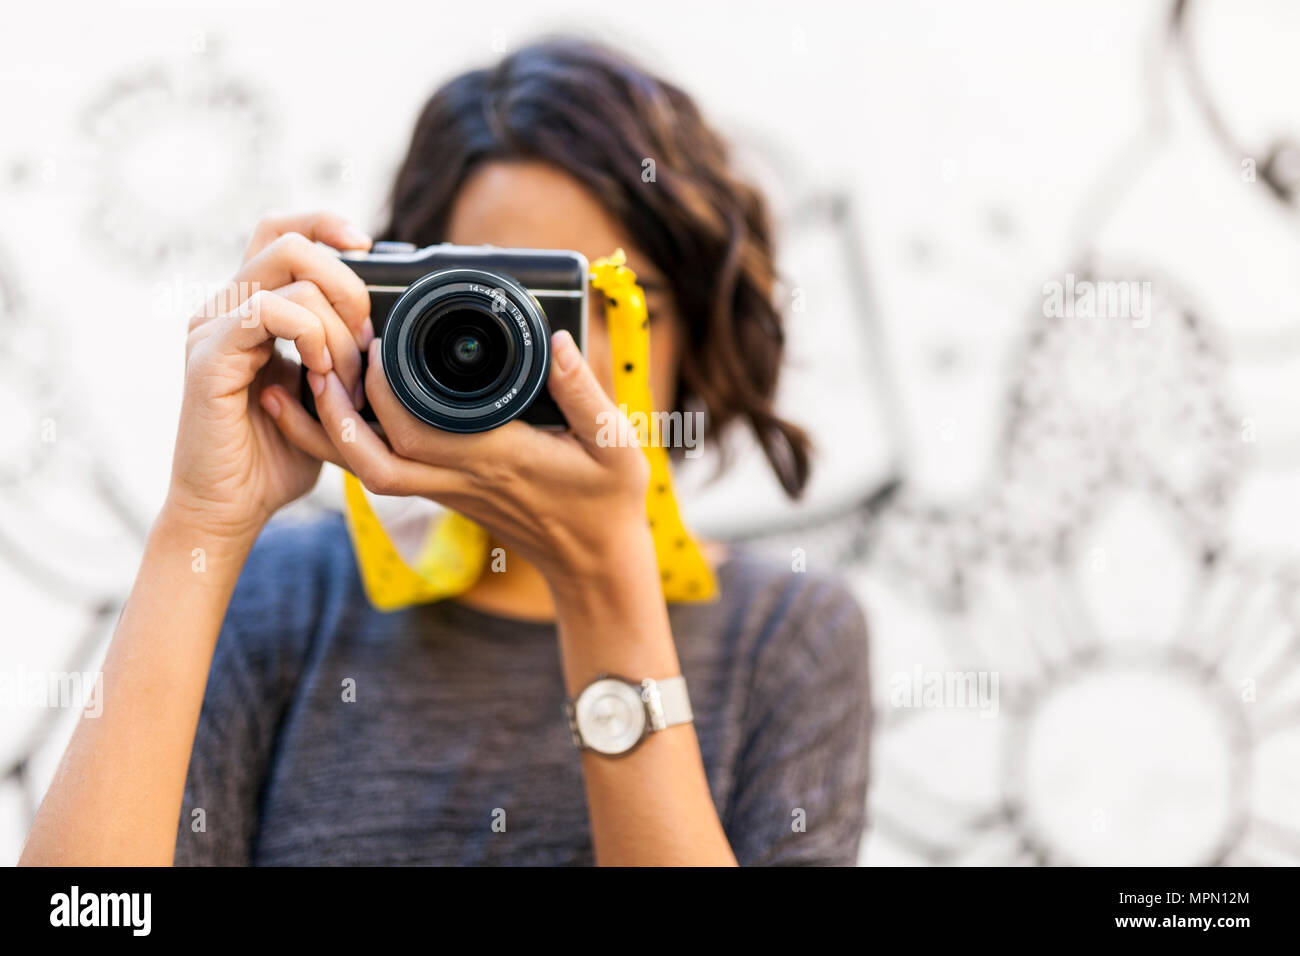 Close-up of woman taking a picture with camera Stock Photo